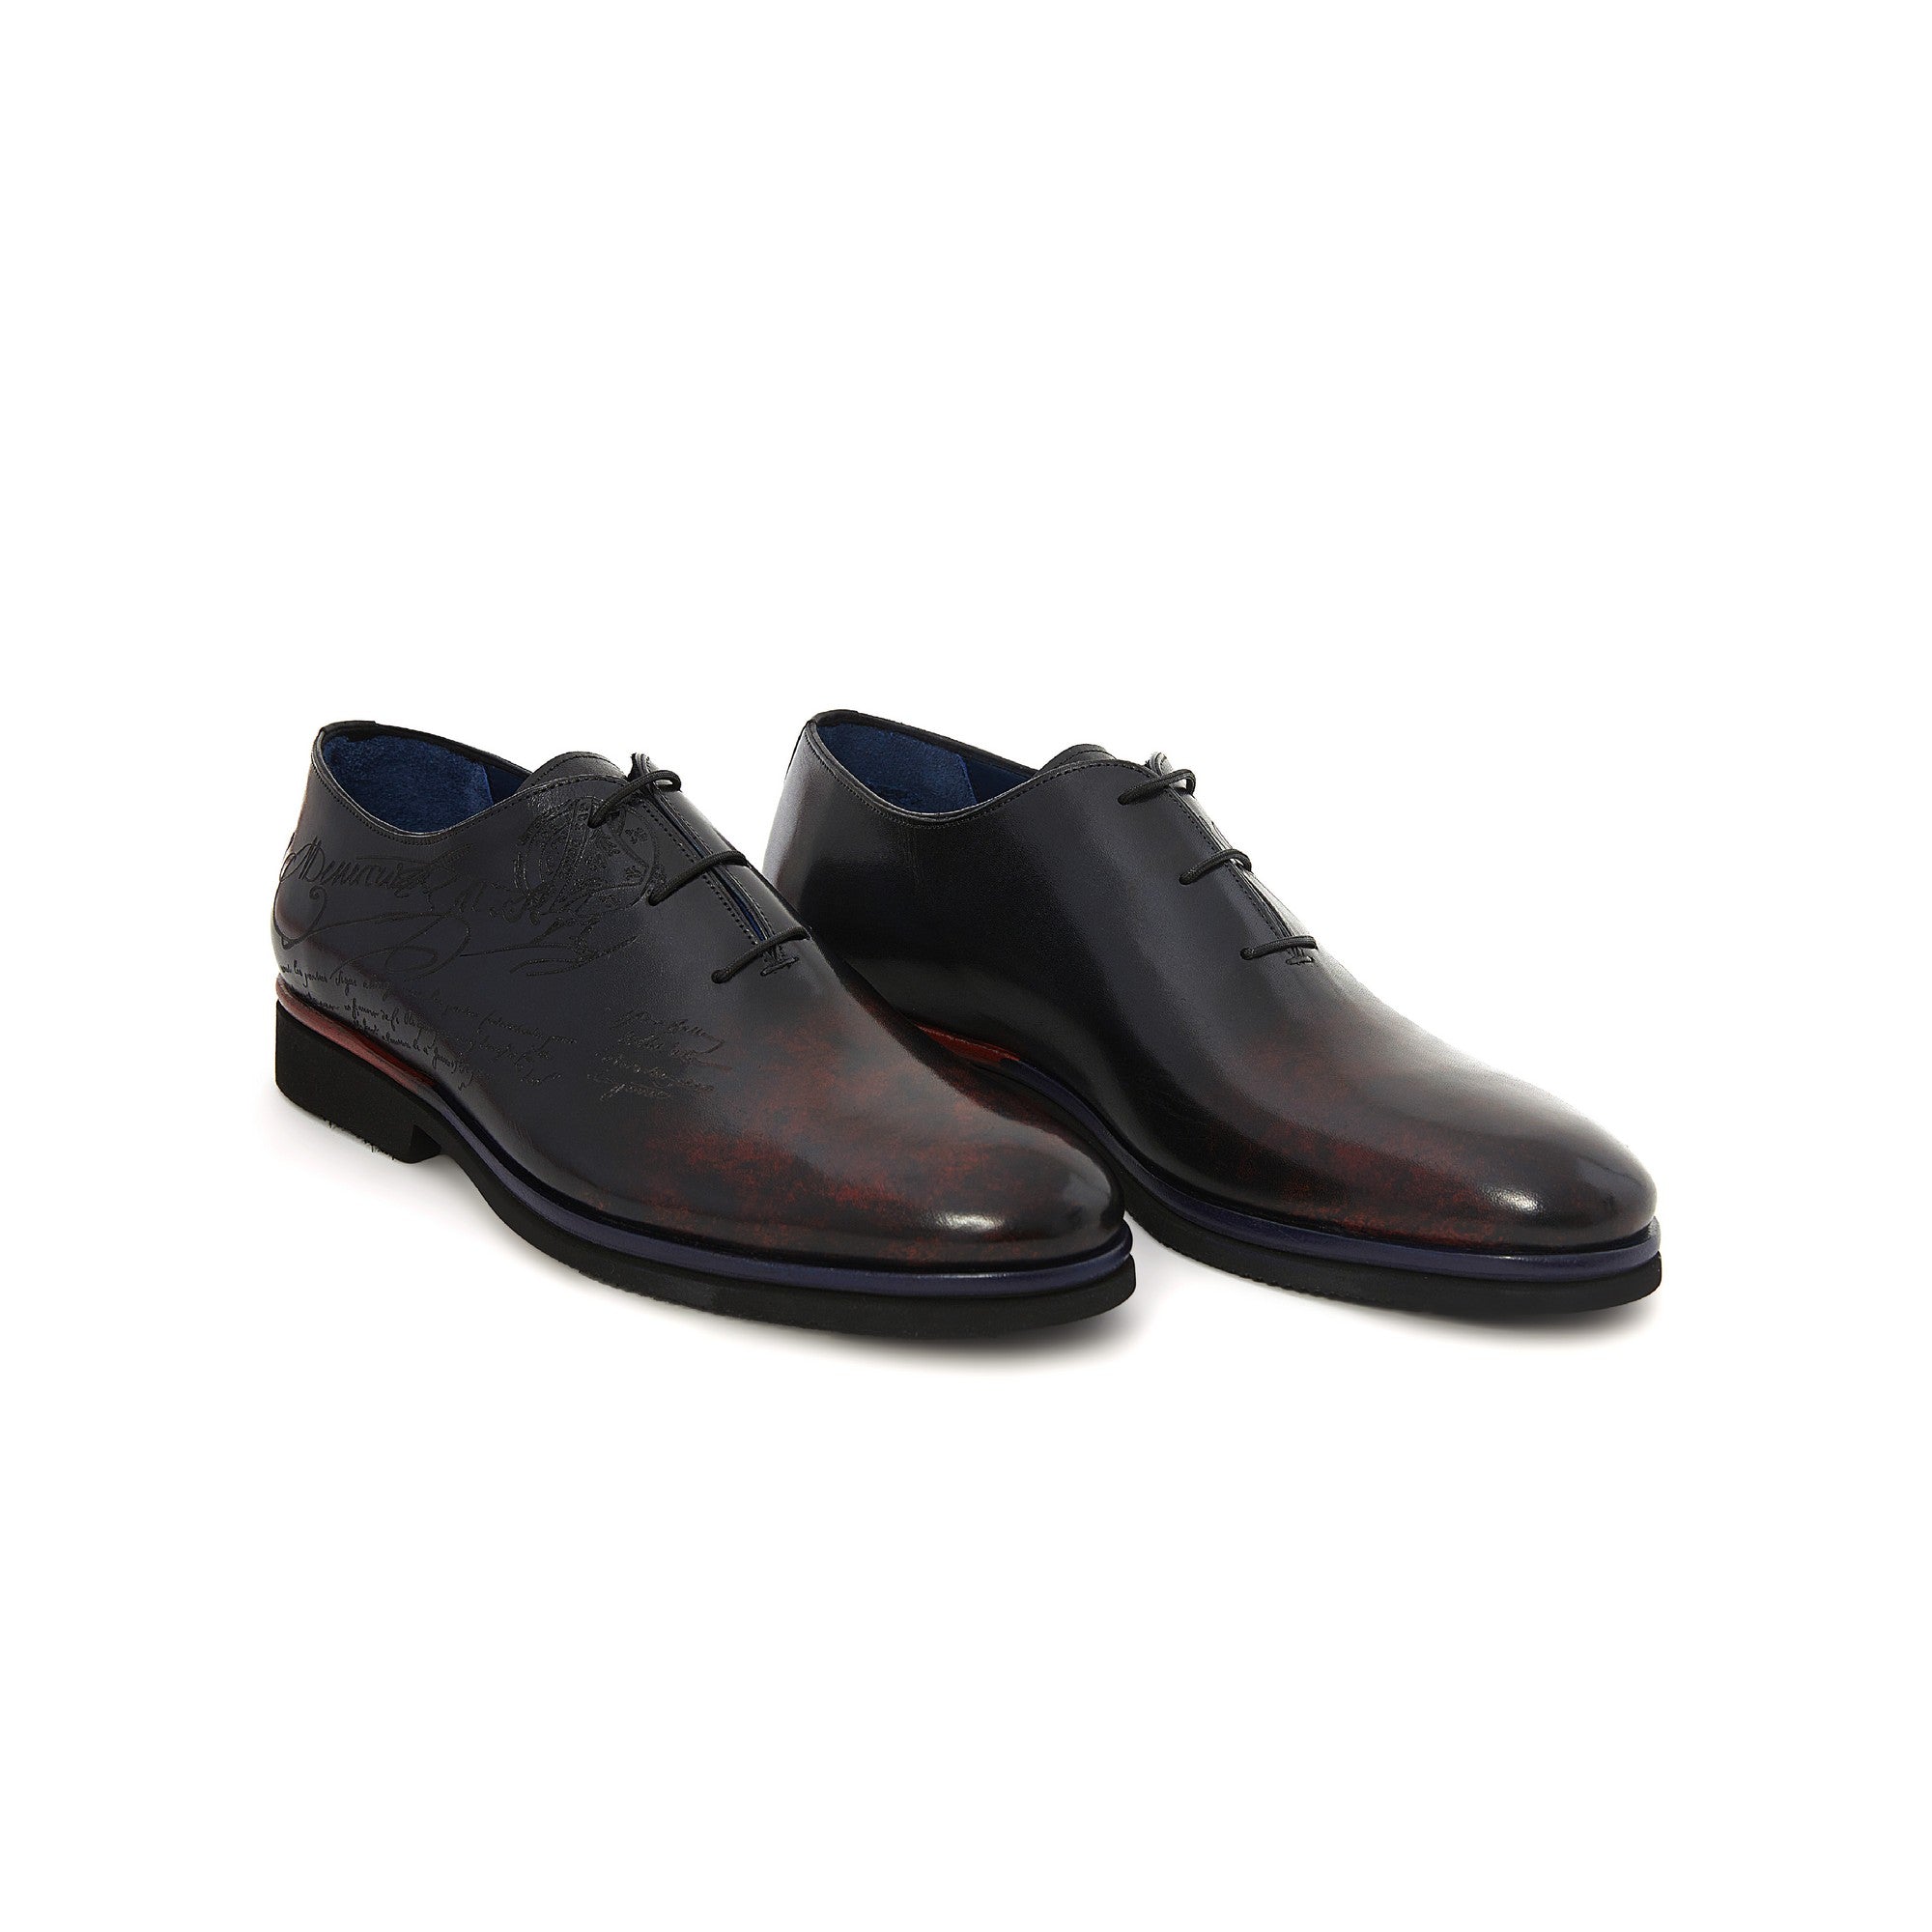 Men's Calf Leather Lace Up Handmade Oxford M7041